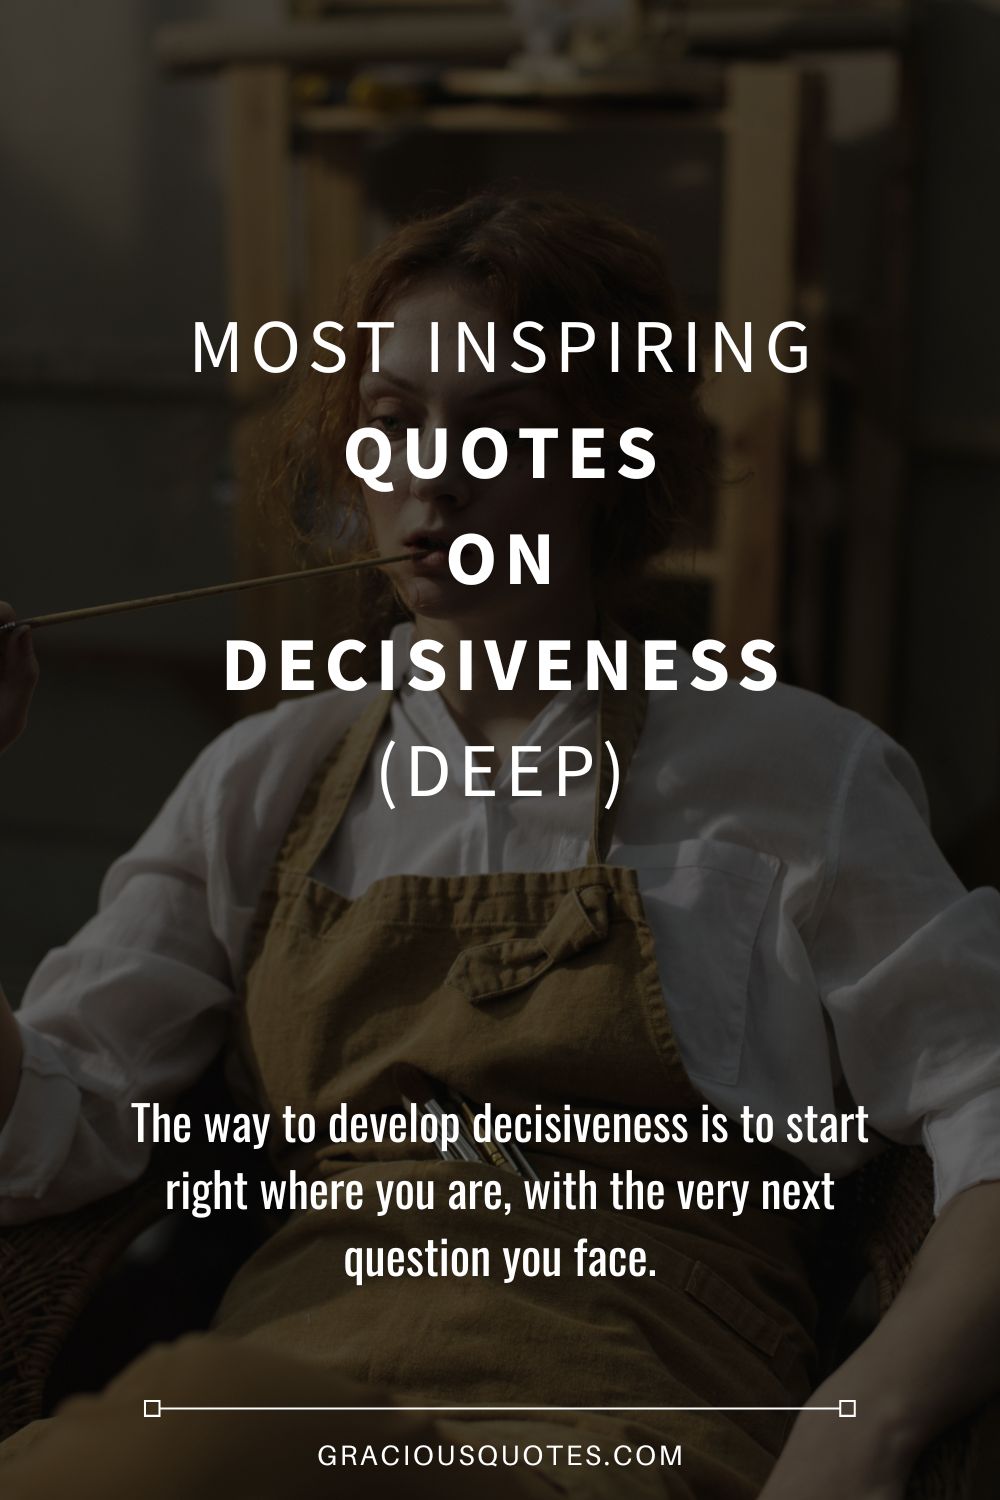 Most Inspiring Quotes on Decisiveness (DEEP) - Gracious Quotes